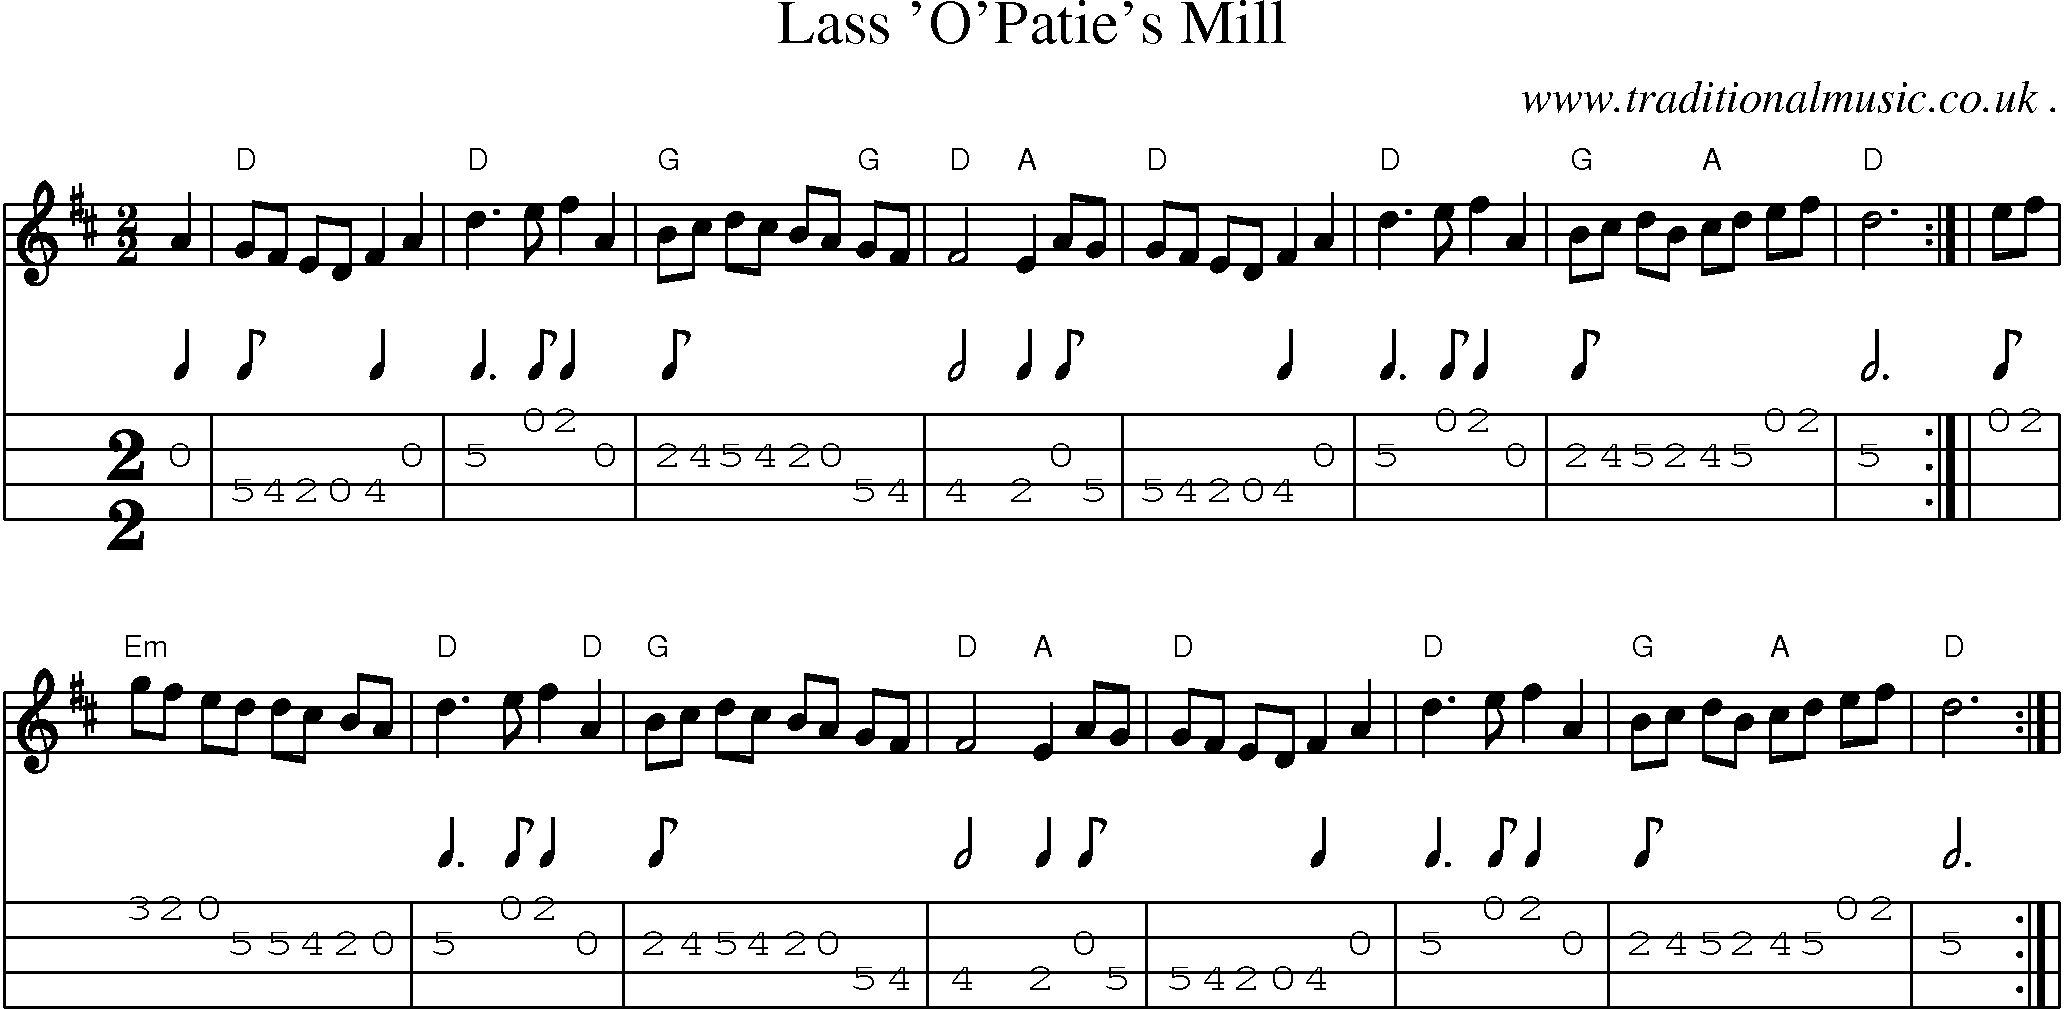 Sheet-music  score, Chords and Mandolin Tabs for Lass Opaties Mill